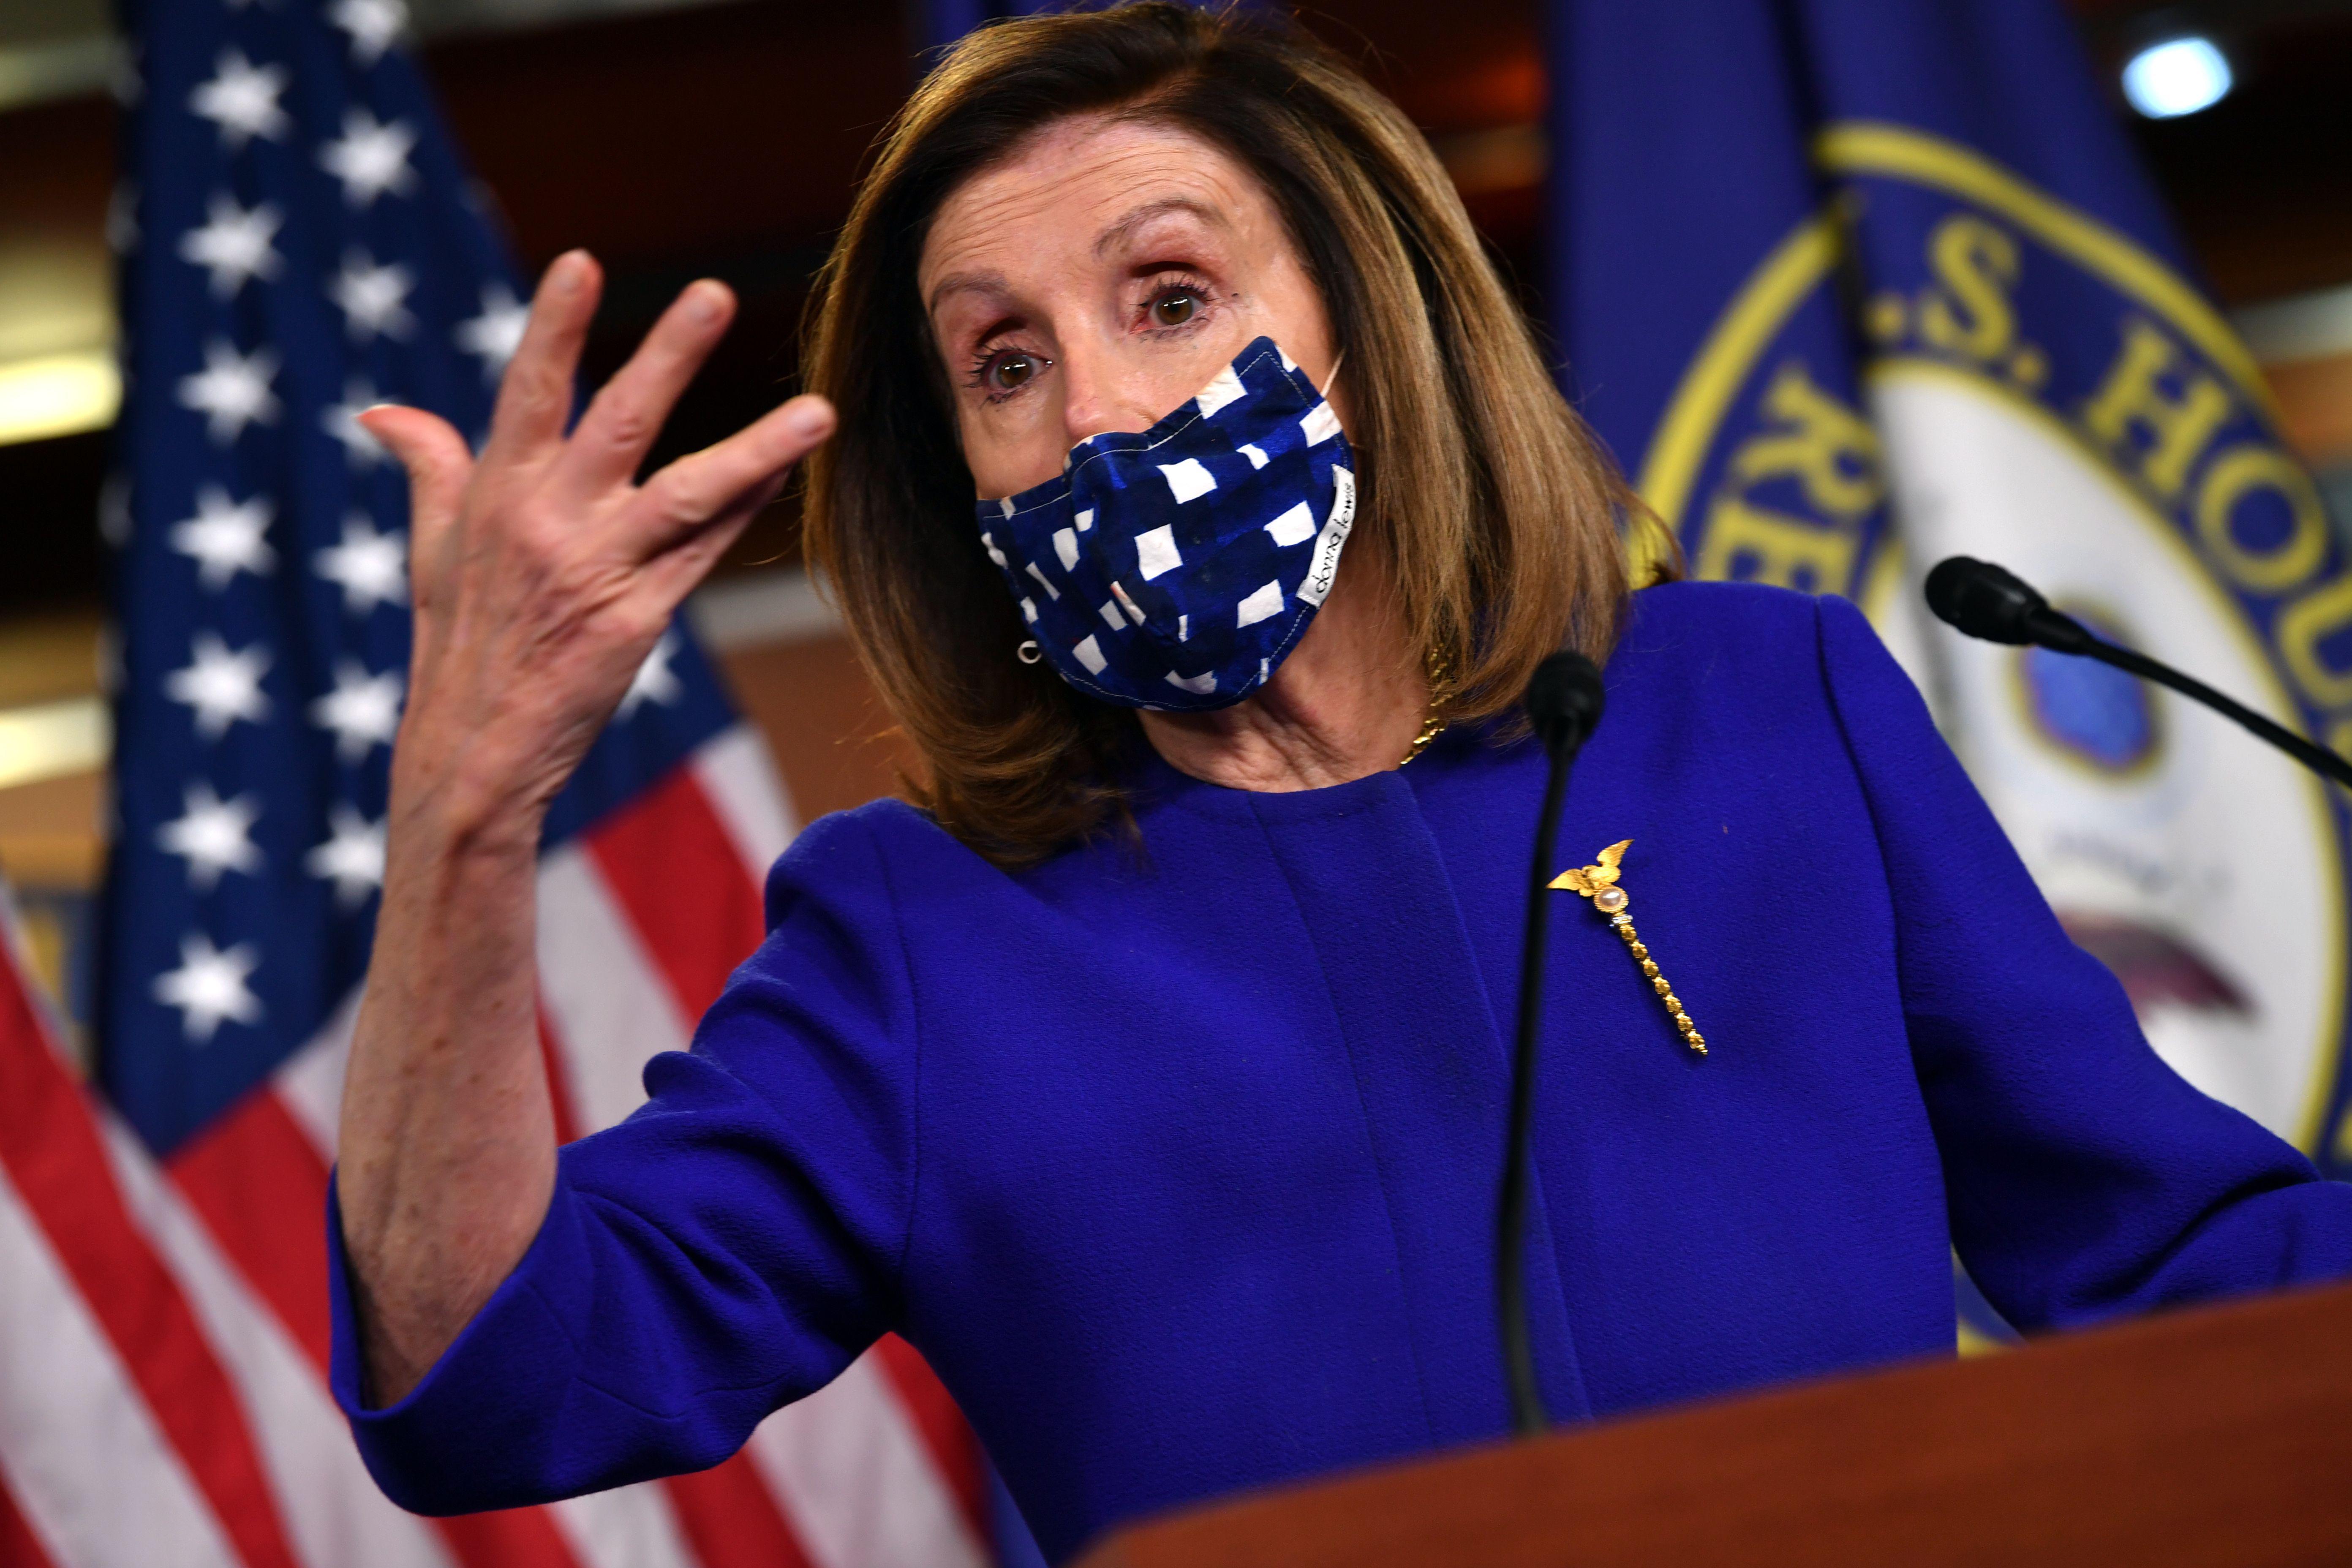 Nancy Pelosi gesticulates while wearing a mask and standing at a podium in front of a U.S. flag and a House of Representatives flag.